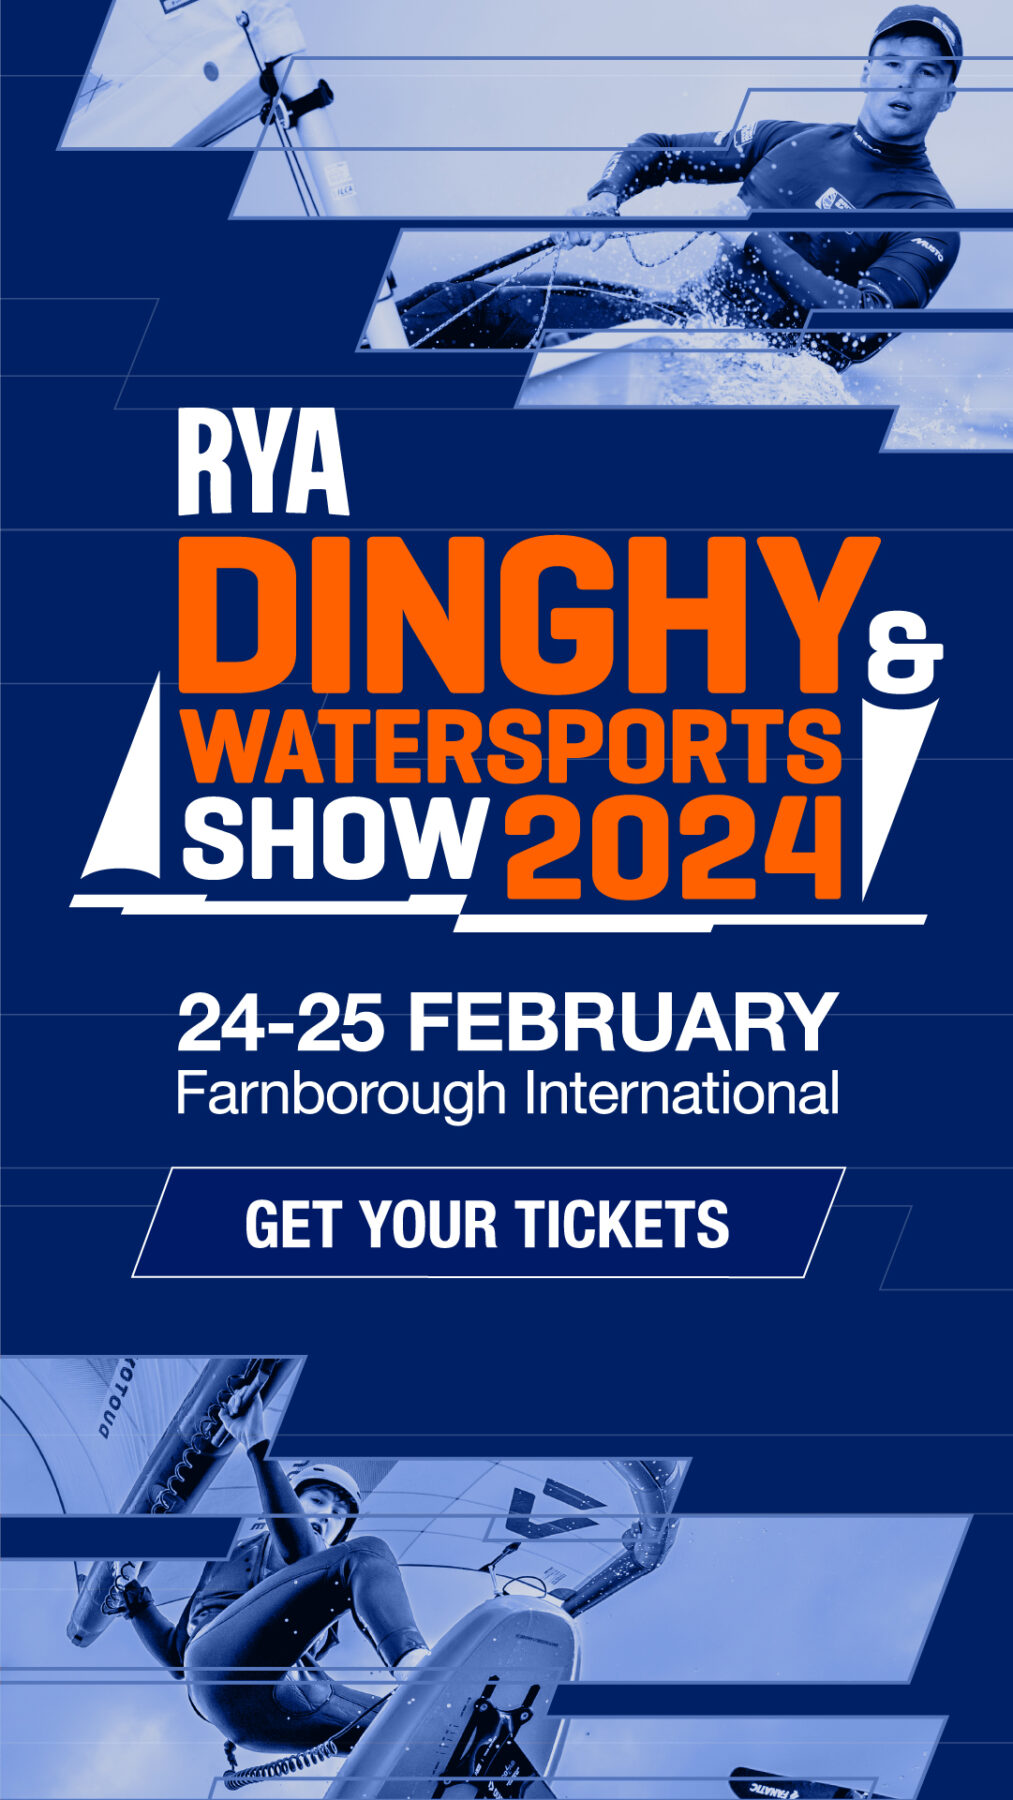 SMALL PACKS, BIG SOLUTIONS: PRACTICAL WEST SYSTEM DEMONSTRATIONS FROM EXPERTS AT THIS YEAR’S RYA DINGHY & WATER SPORTS SHOW 2024